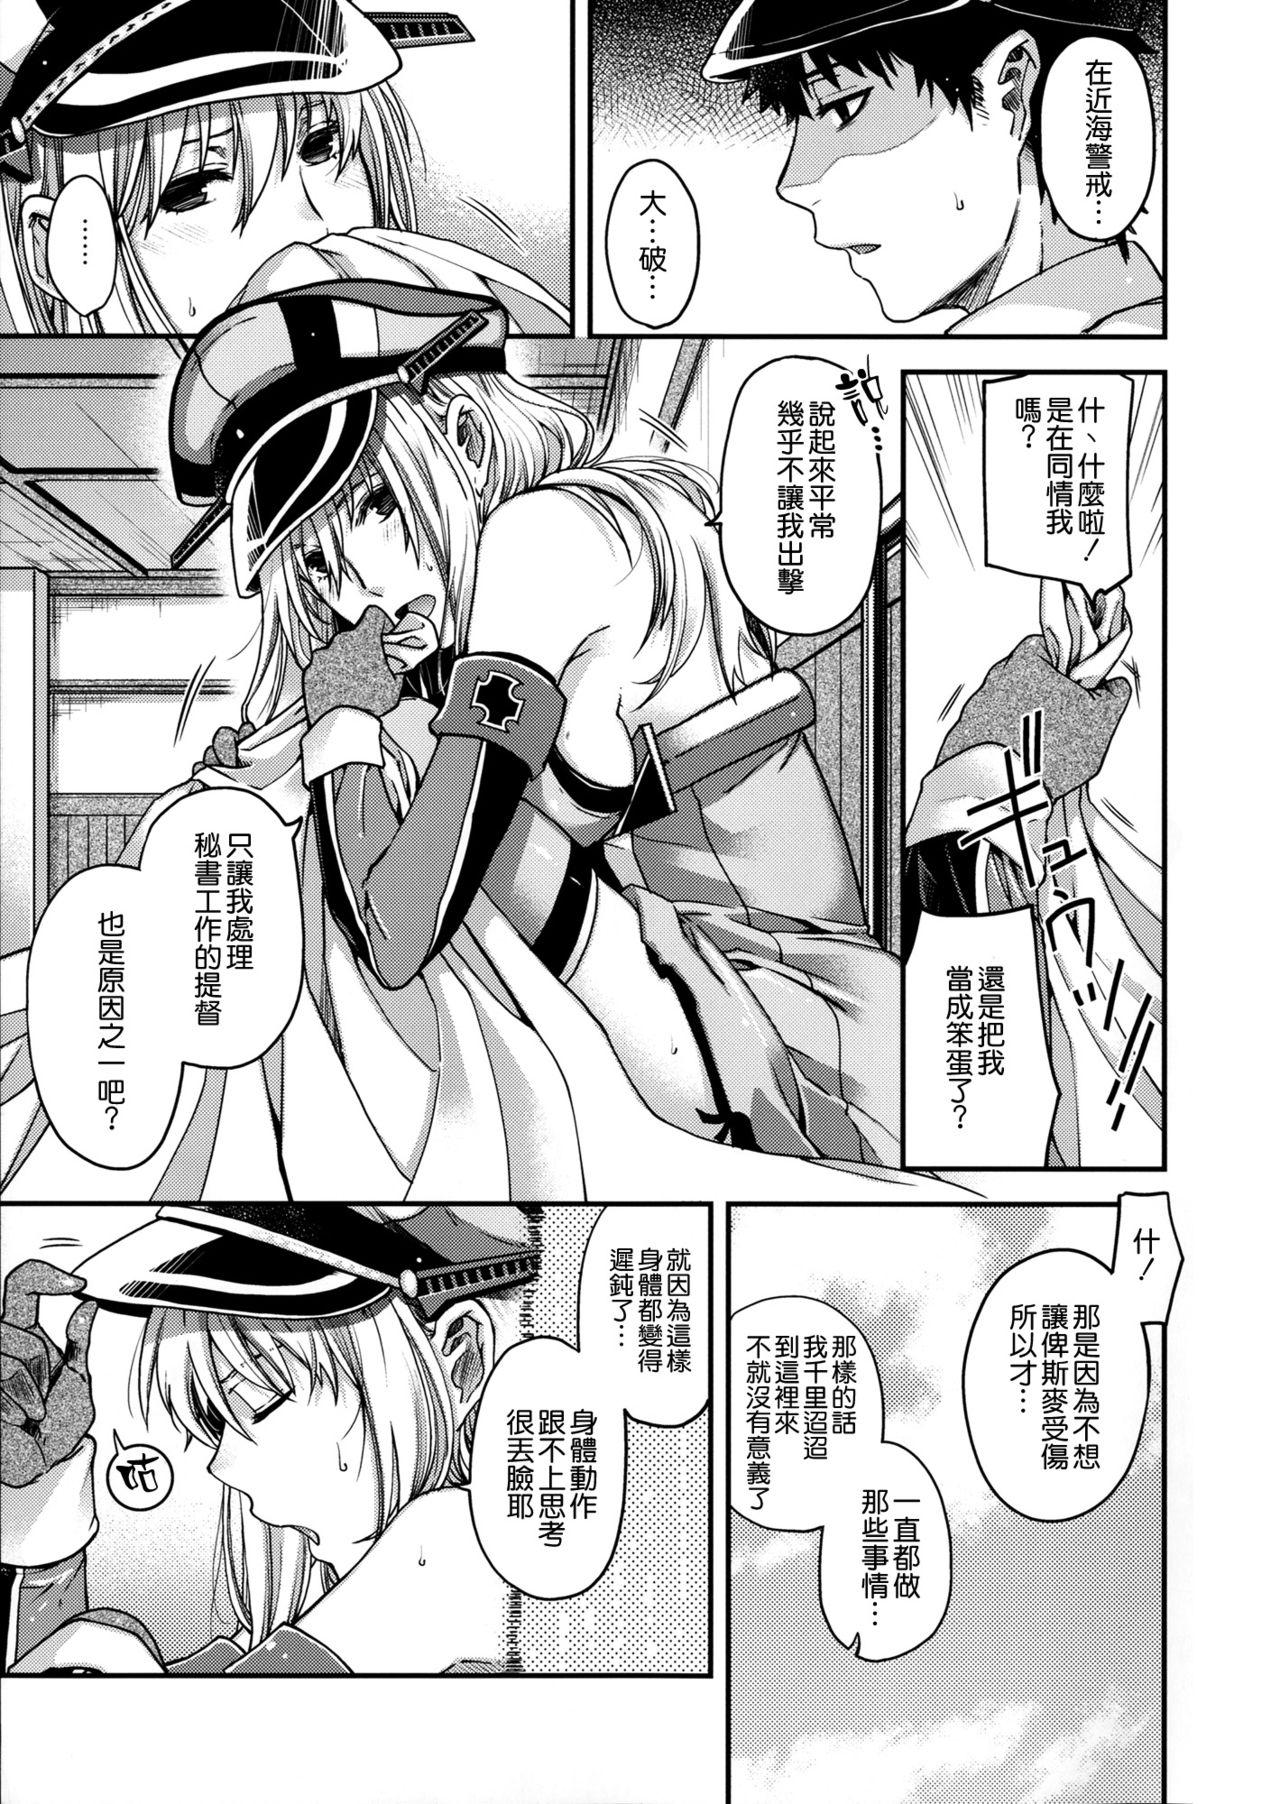 Gros Seins Admiral!!! + Omake Paper - Kantai collection Colombiana - Page 9